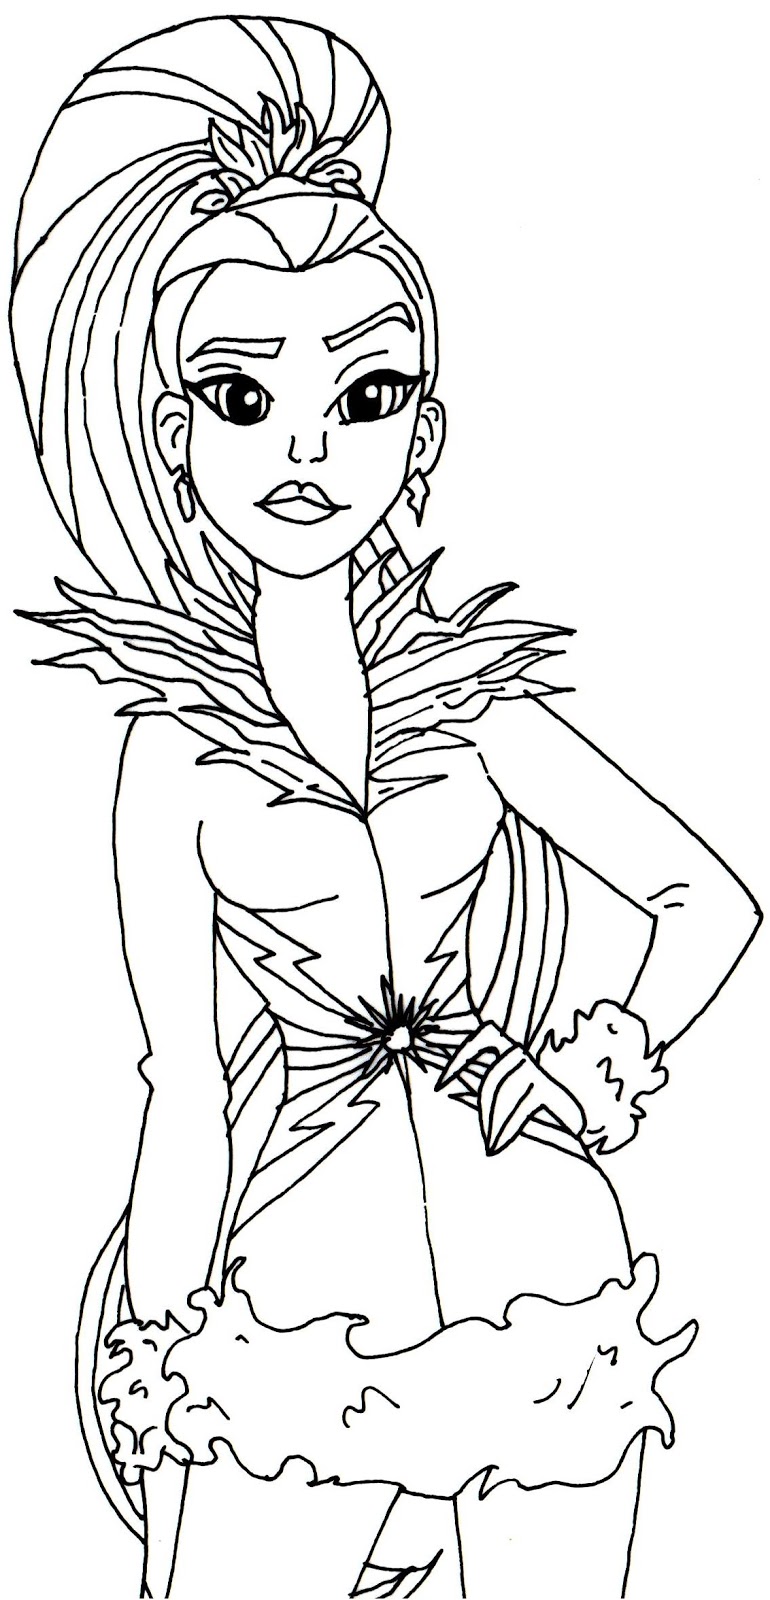 Dc Superhero Girls Coloring Pages at GetColorings.com ...